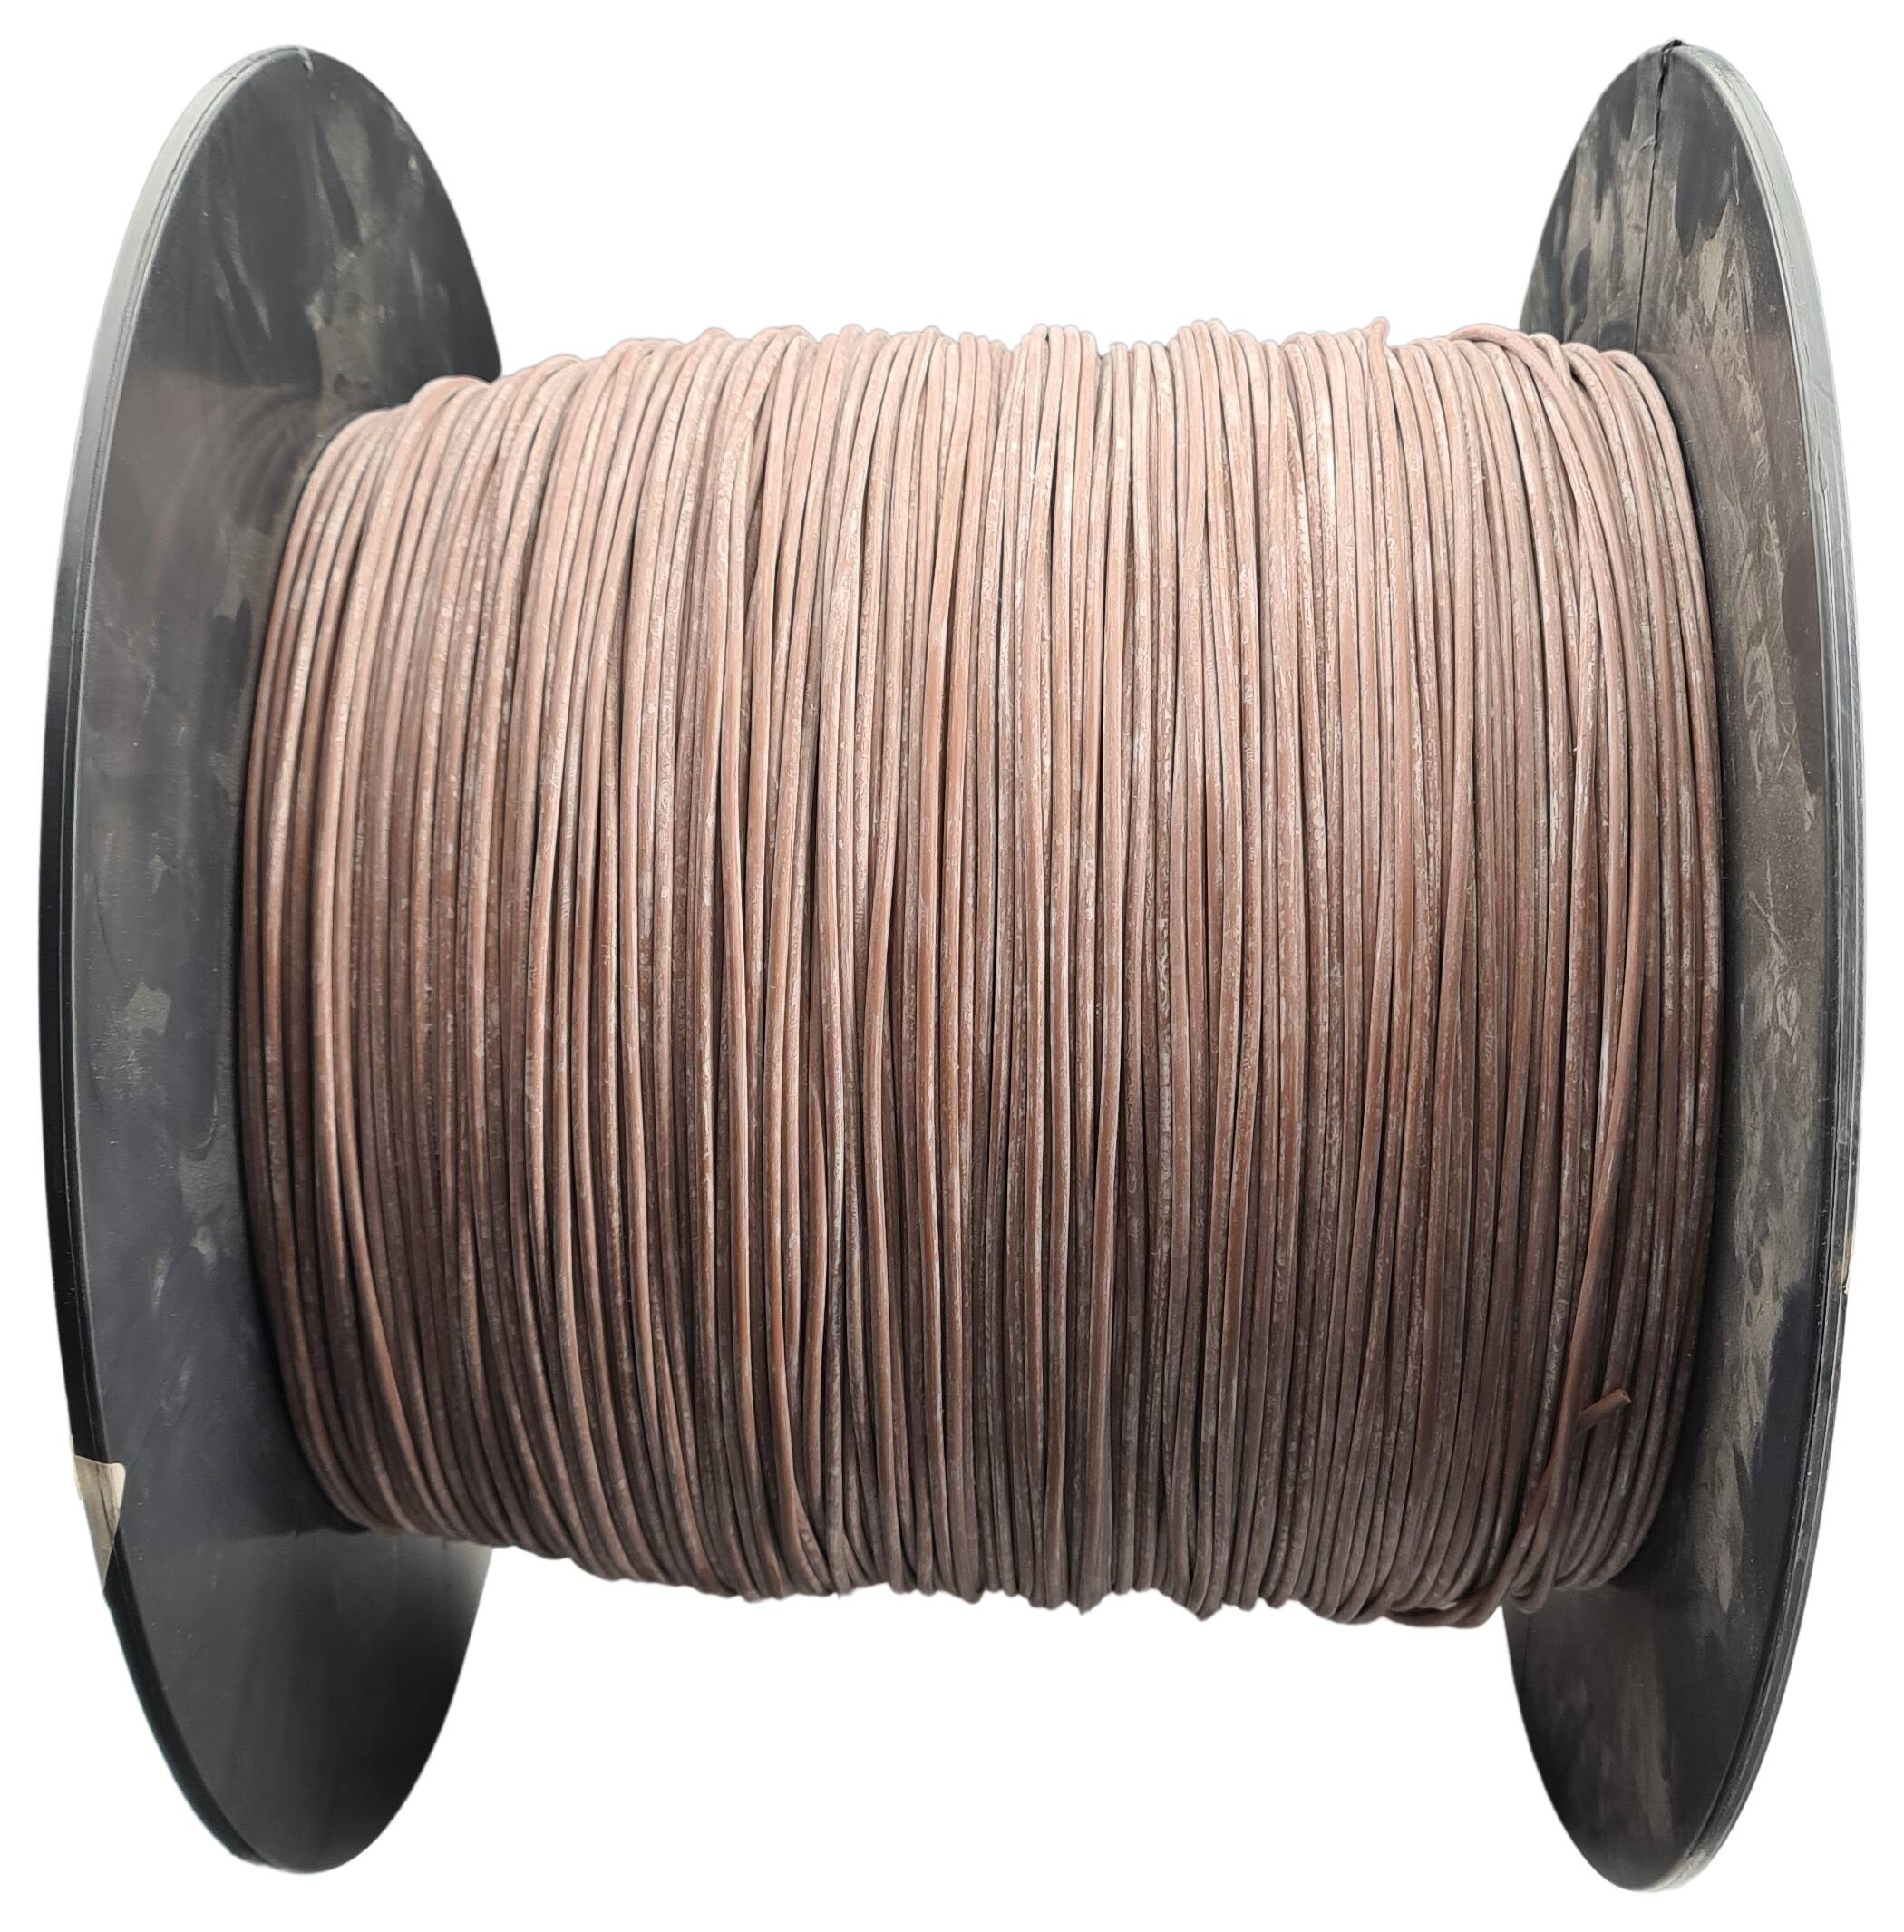 silicone strand cable 1x0,75 N2GFAF 1.000 meter spool brown